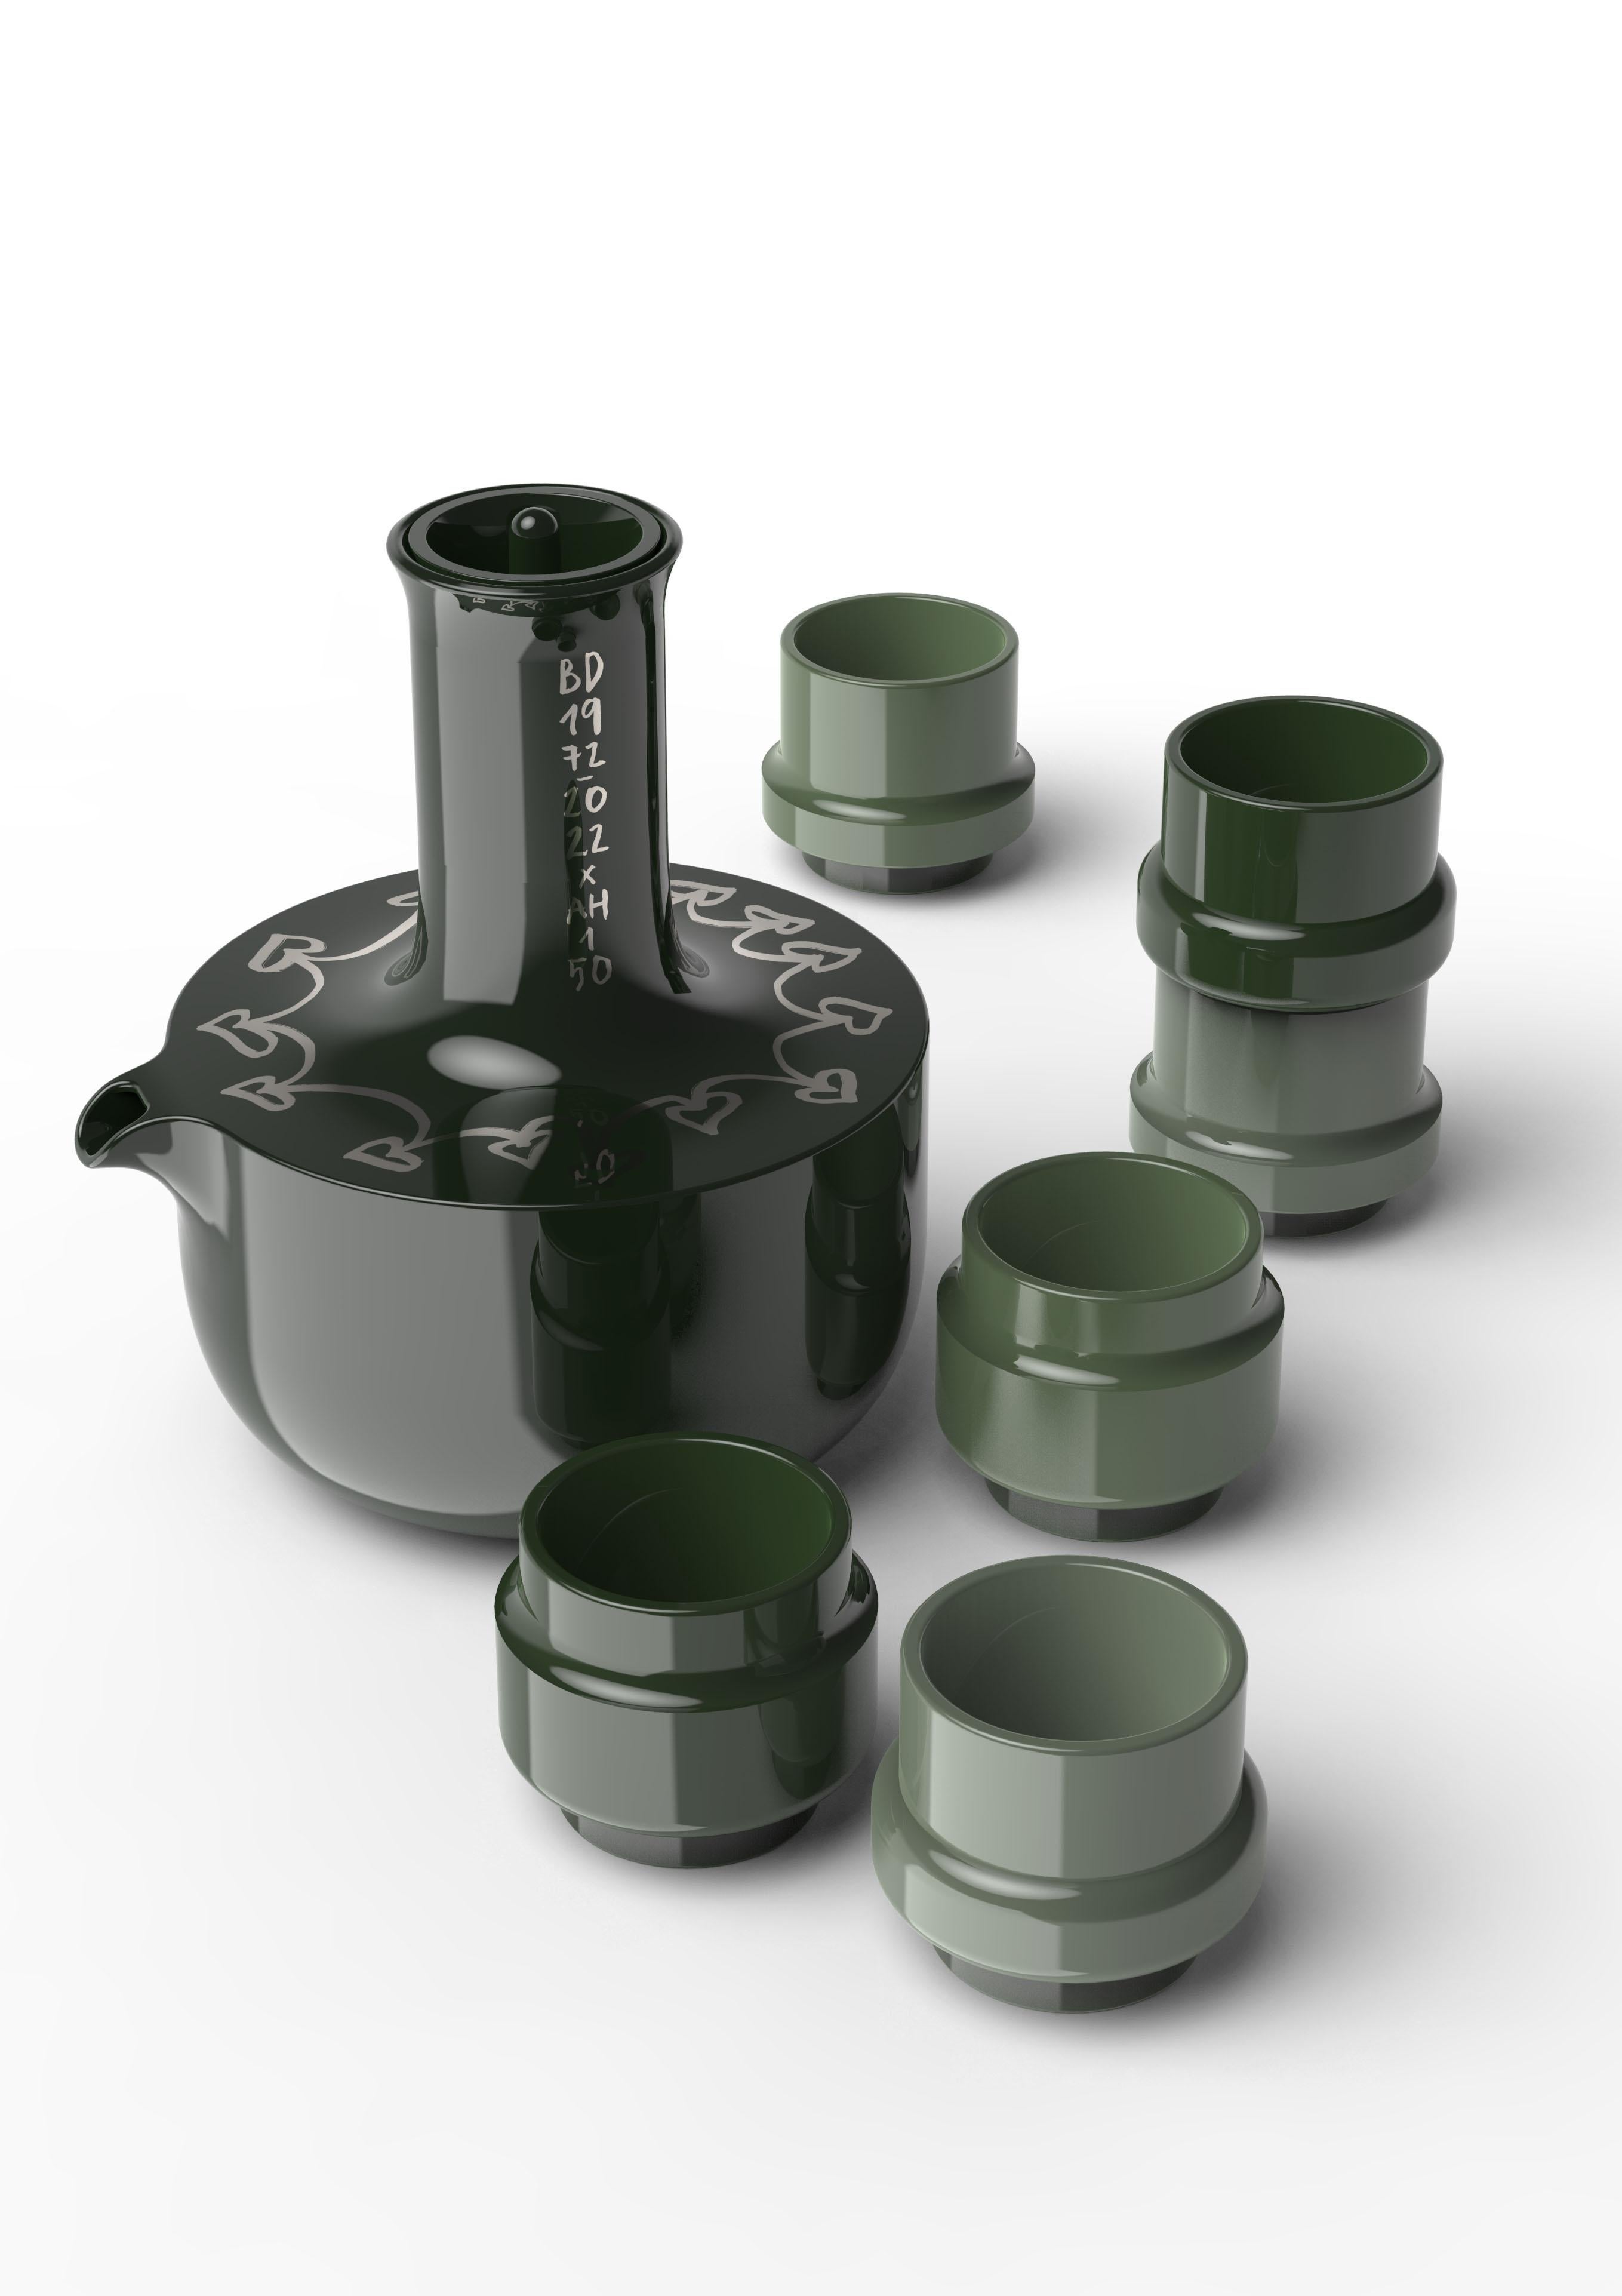 Green Doobide srockery set by Alfredo Häberli
Limited Edition of 10 sets per color.
Materials: Dyed porcelain, painted by hand in platinum.
Dimensions: Teapot: D 16 x W 16 x H 18 cm. 
Teacup: D 6,5 x W 6,5 x H 5,6 cm.
Available in Beige, Green,